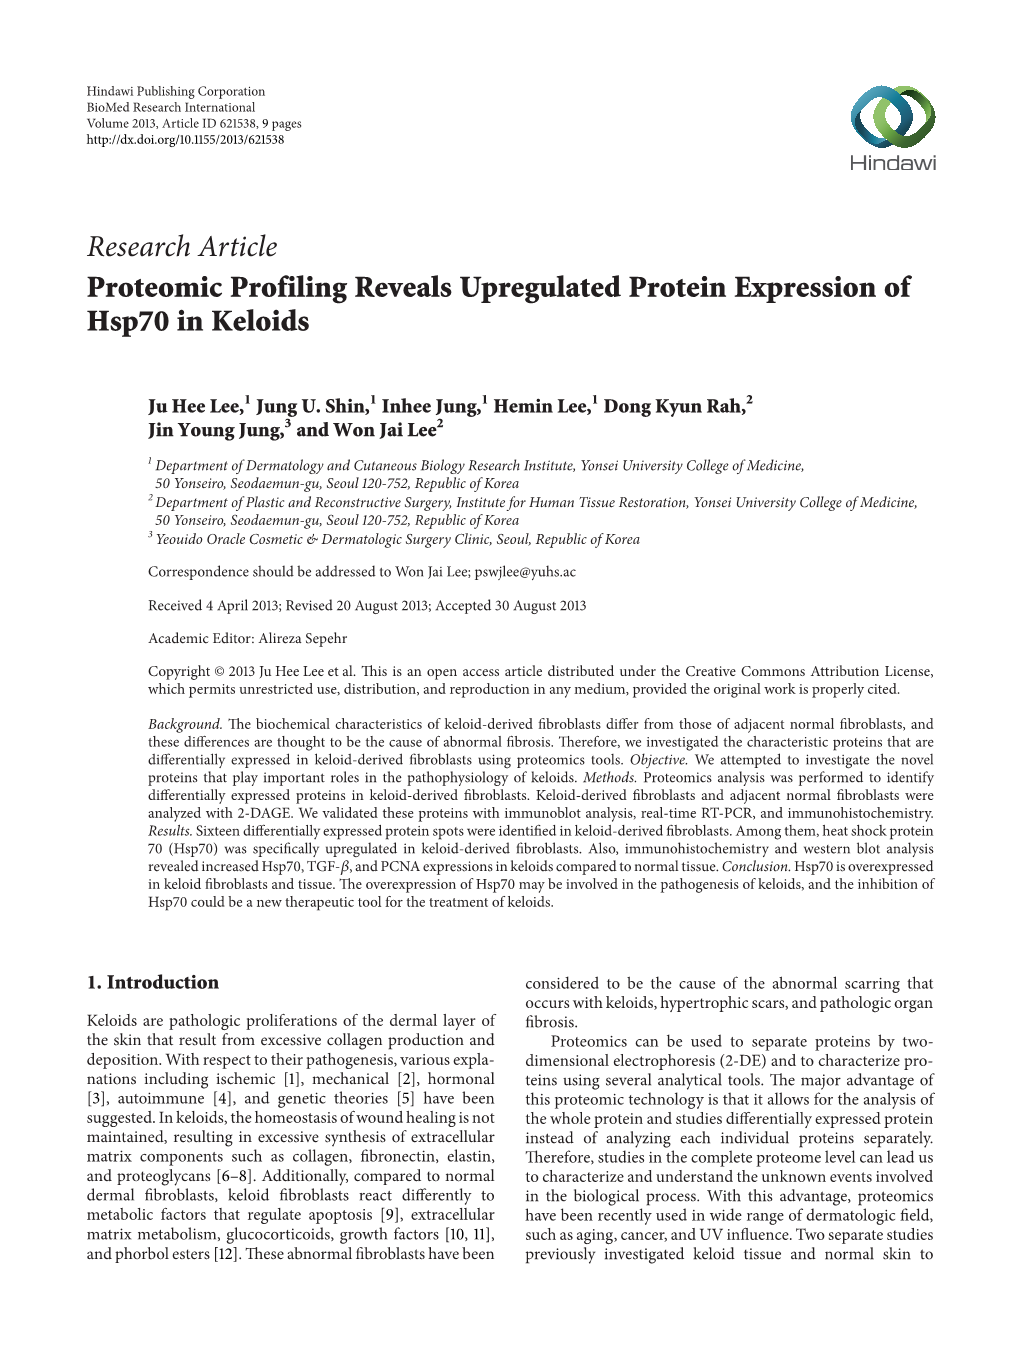 Proteomic Profiling Reveals Upregulated Protein Expression of Hsp70 in Keloids